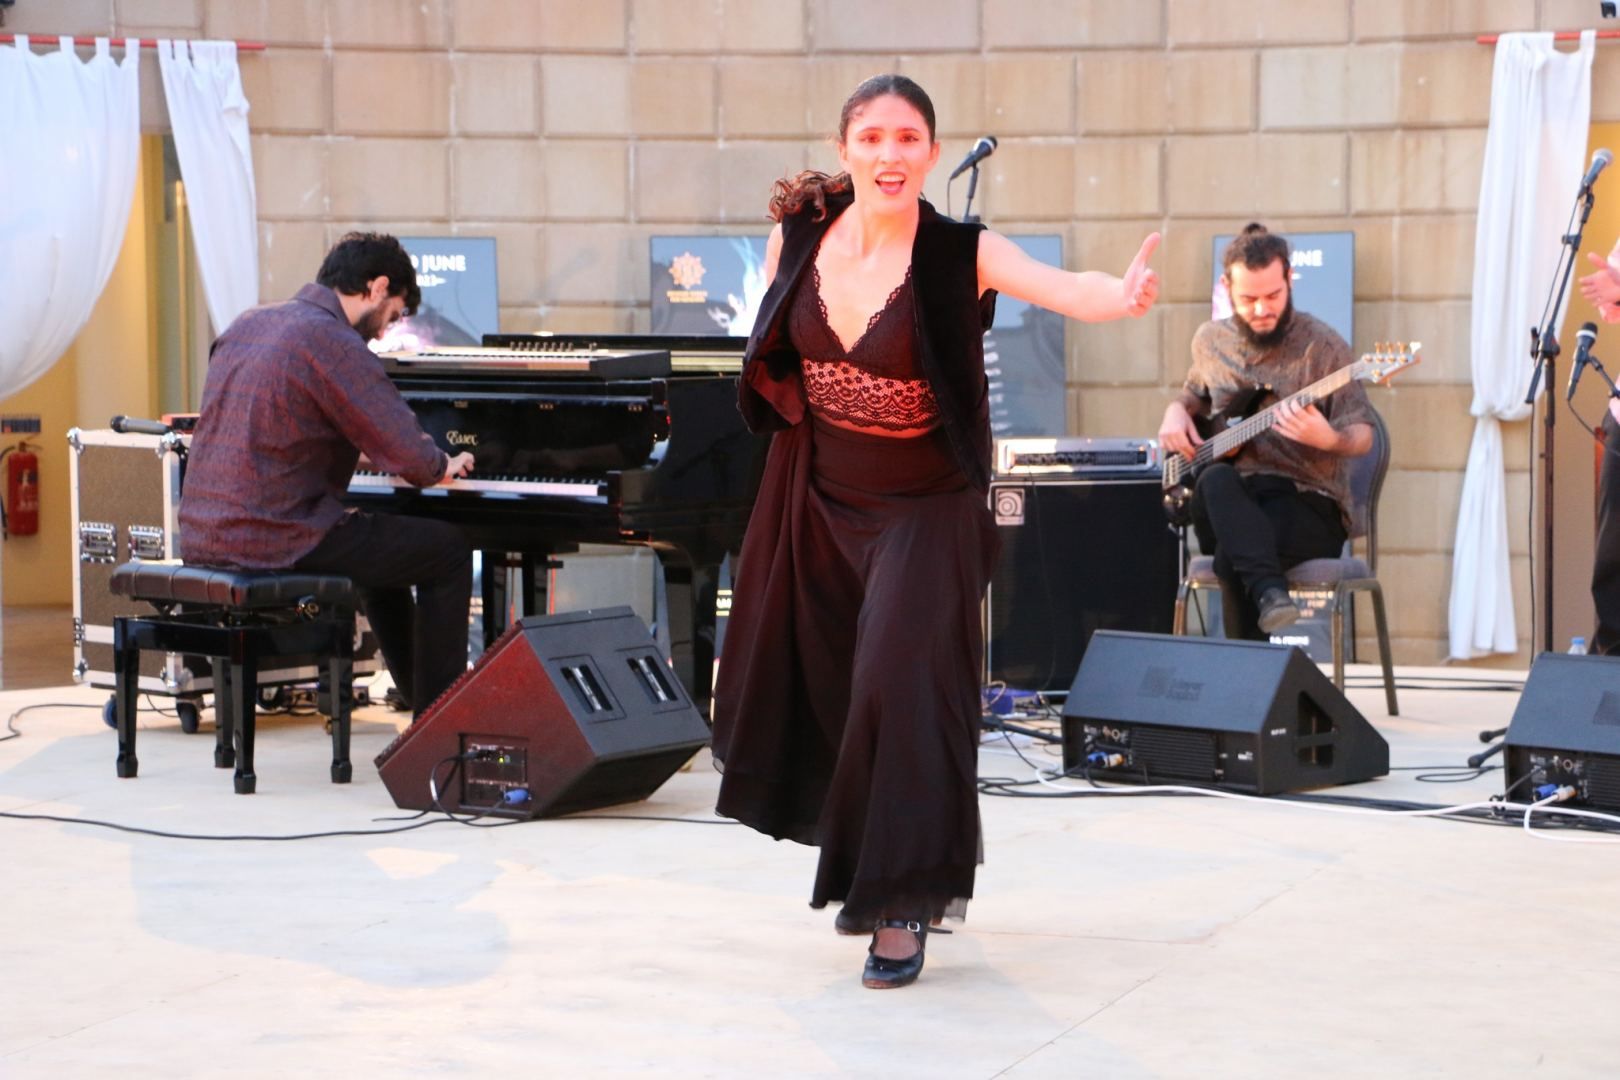 Flamenco show mesmerizes audience with sultry blend of singing and dancing [PHOTOS/VIDEOS]